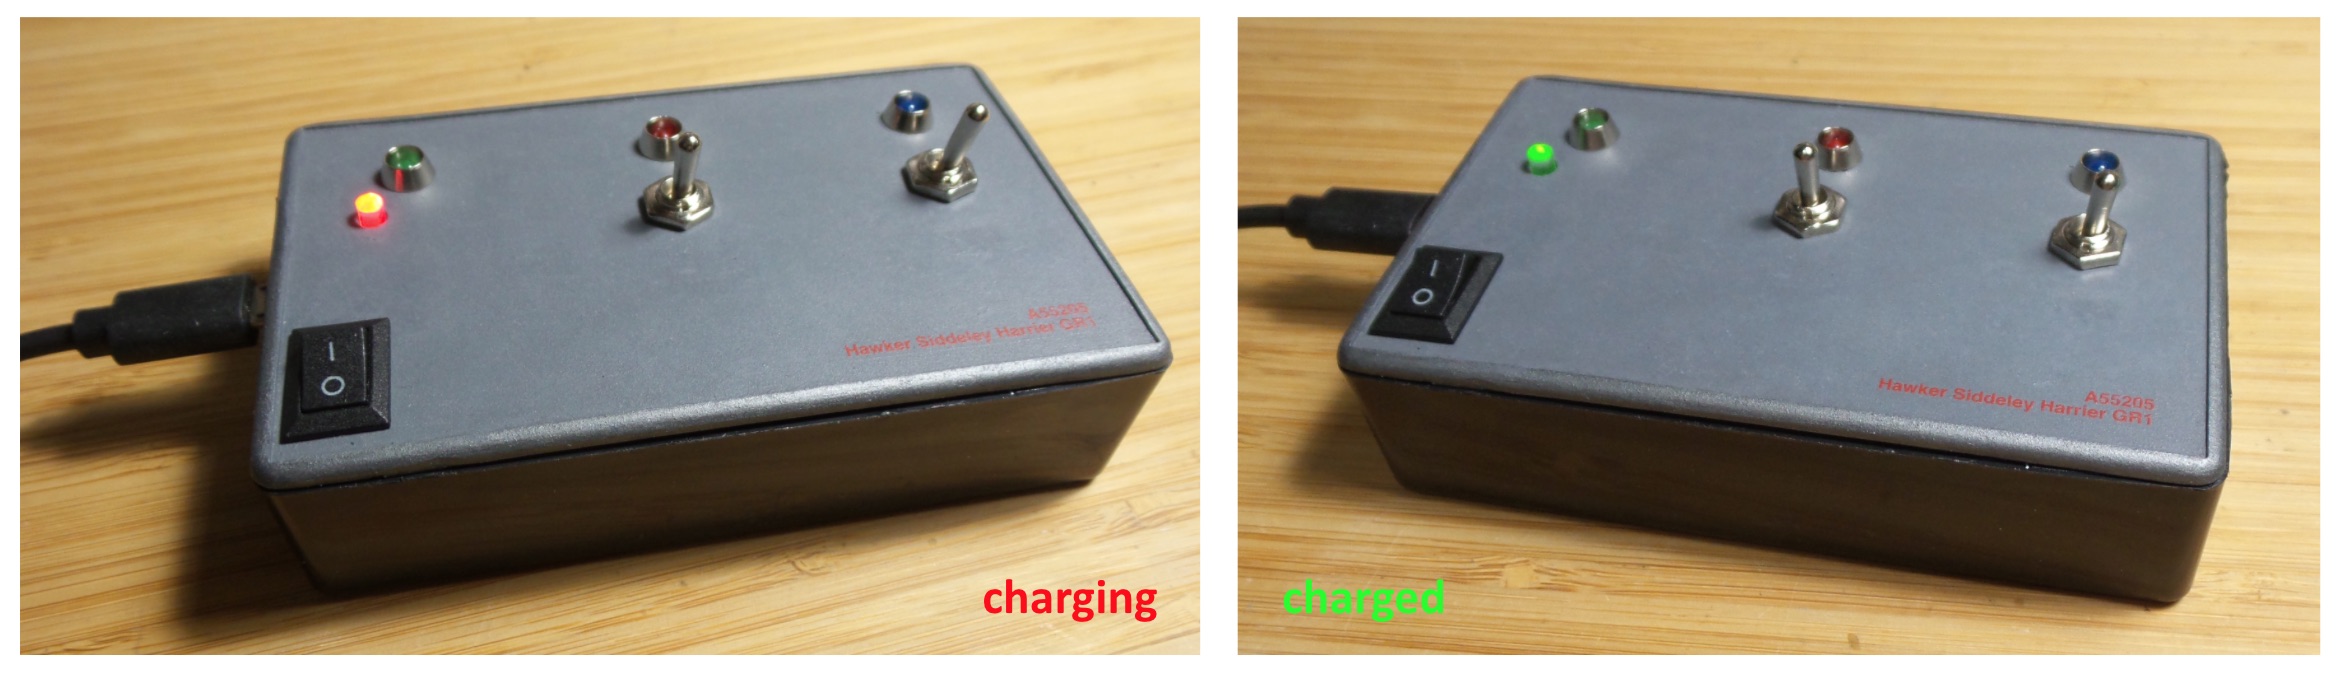 controller_charging